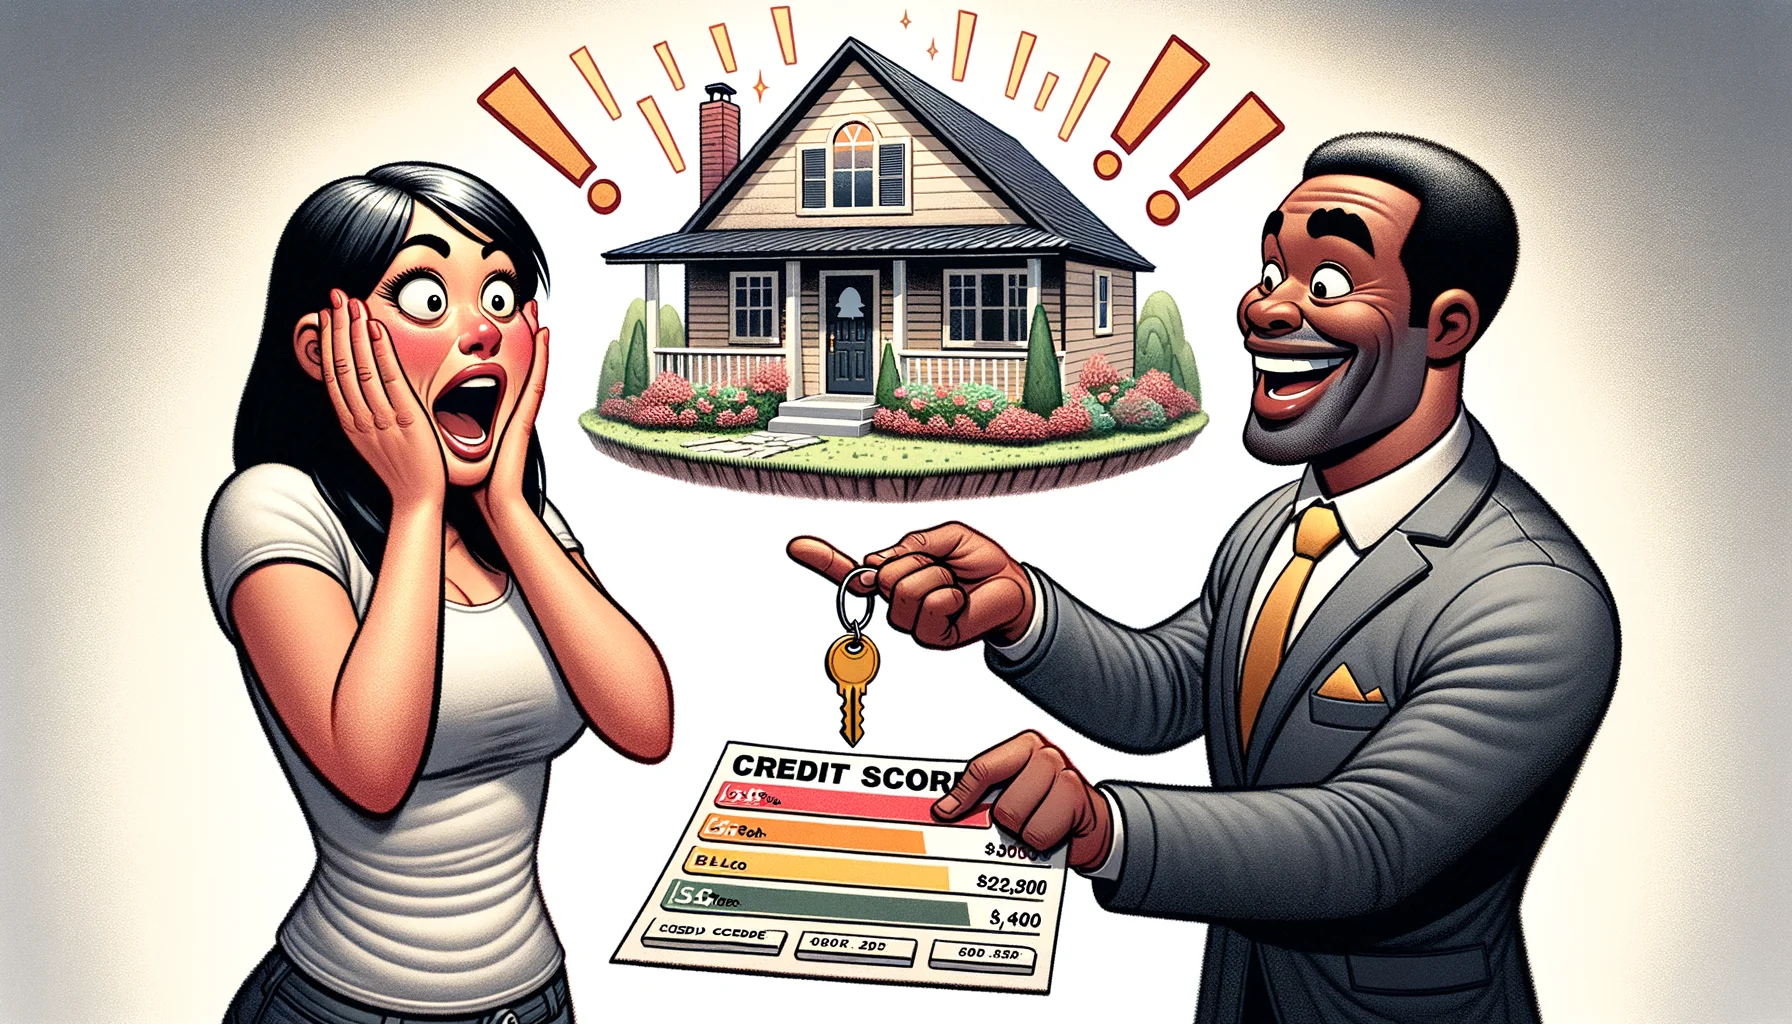 An amusing yet realistic depiction of an ideal scenario where a person is buying a house despite having bad credit. The image should portray a Hispanic woman in her 40s, expressing surprise and joy at the news of her successful house purchase. The real estate agent, a black man in his 50s with a jovial smile, is presenting her with the house keys. In the background, there's a charming modest house that she has just purchased. A chart in the corner of the image humorously shows a low credit score miraculously jumping to a perfect score, symbolizing the lucky event.